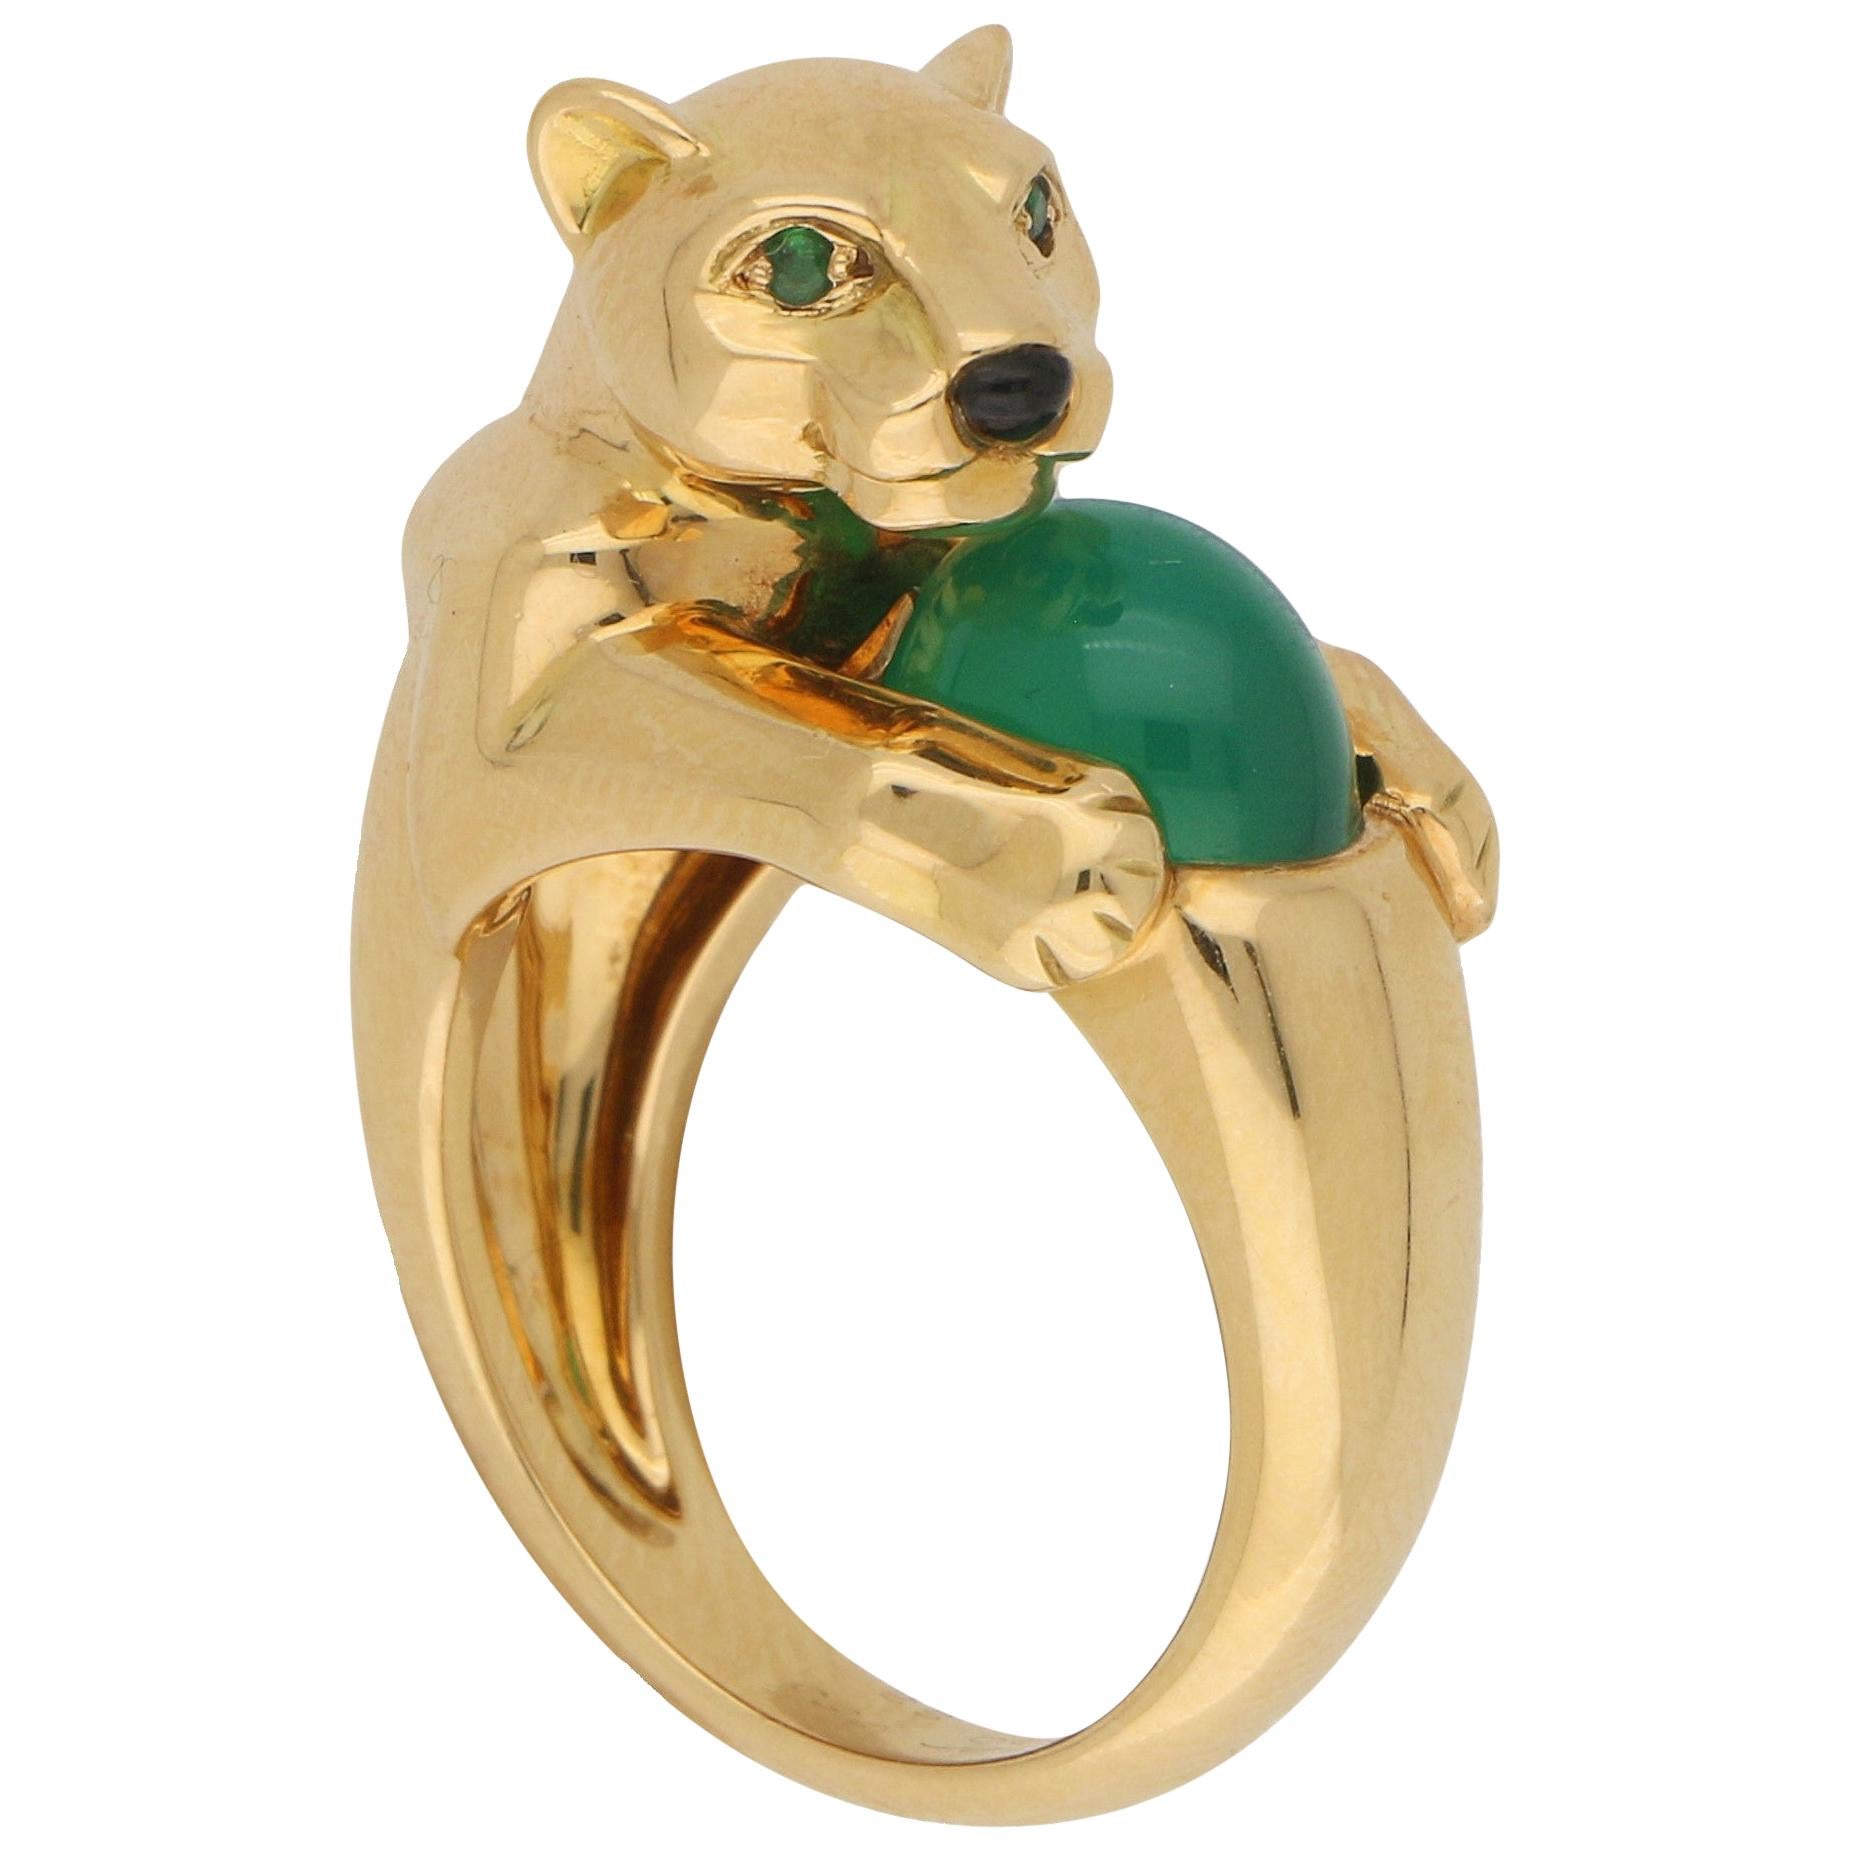 Panthère de Cartier Chalcedony, Emerald and Onyx Panther Ring in 18 Karat Gold